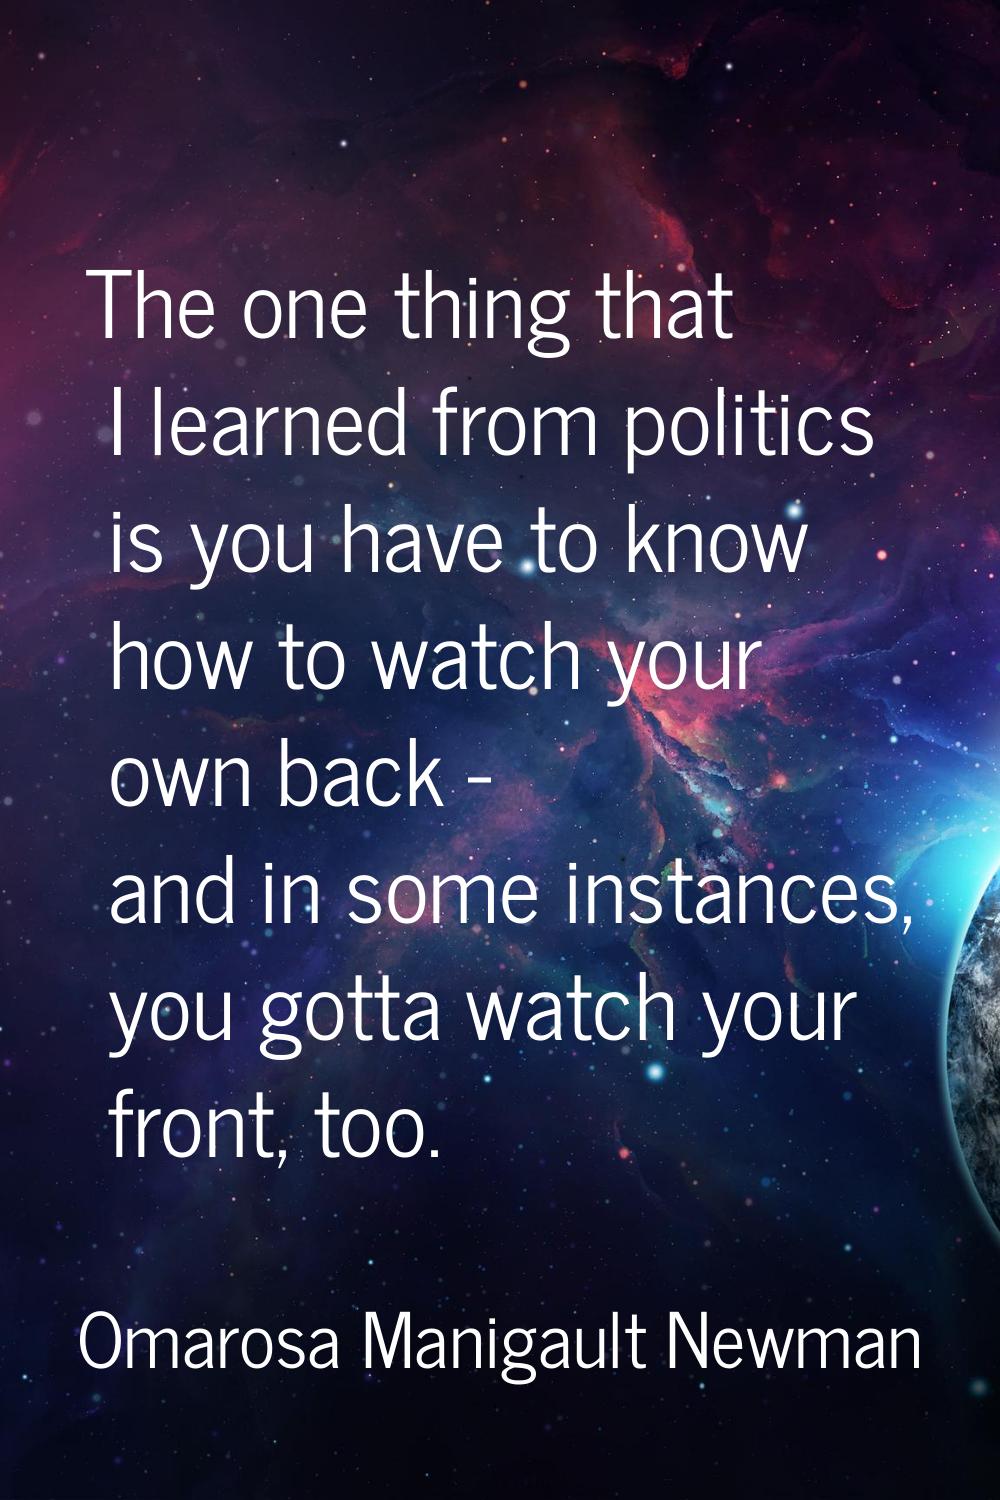 The one thing that I learned from politics is you have to know how to watch your own back - and in 